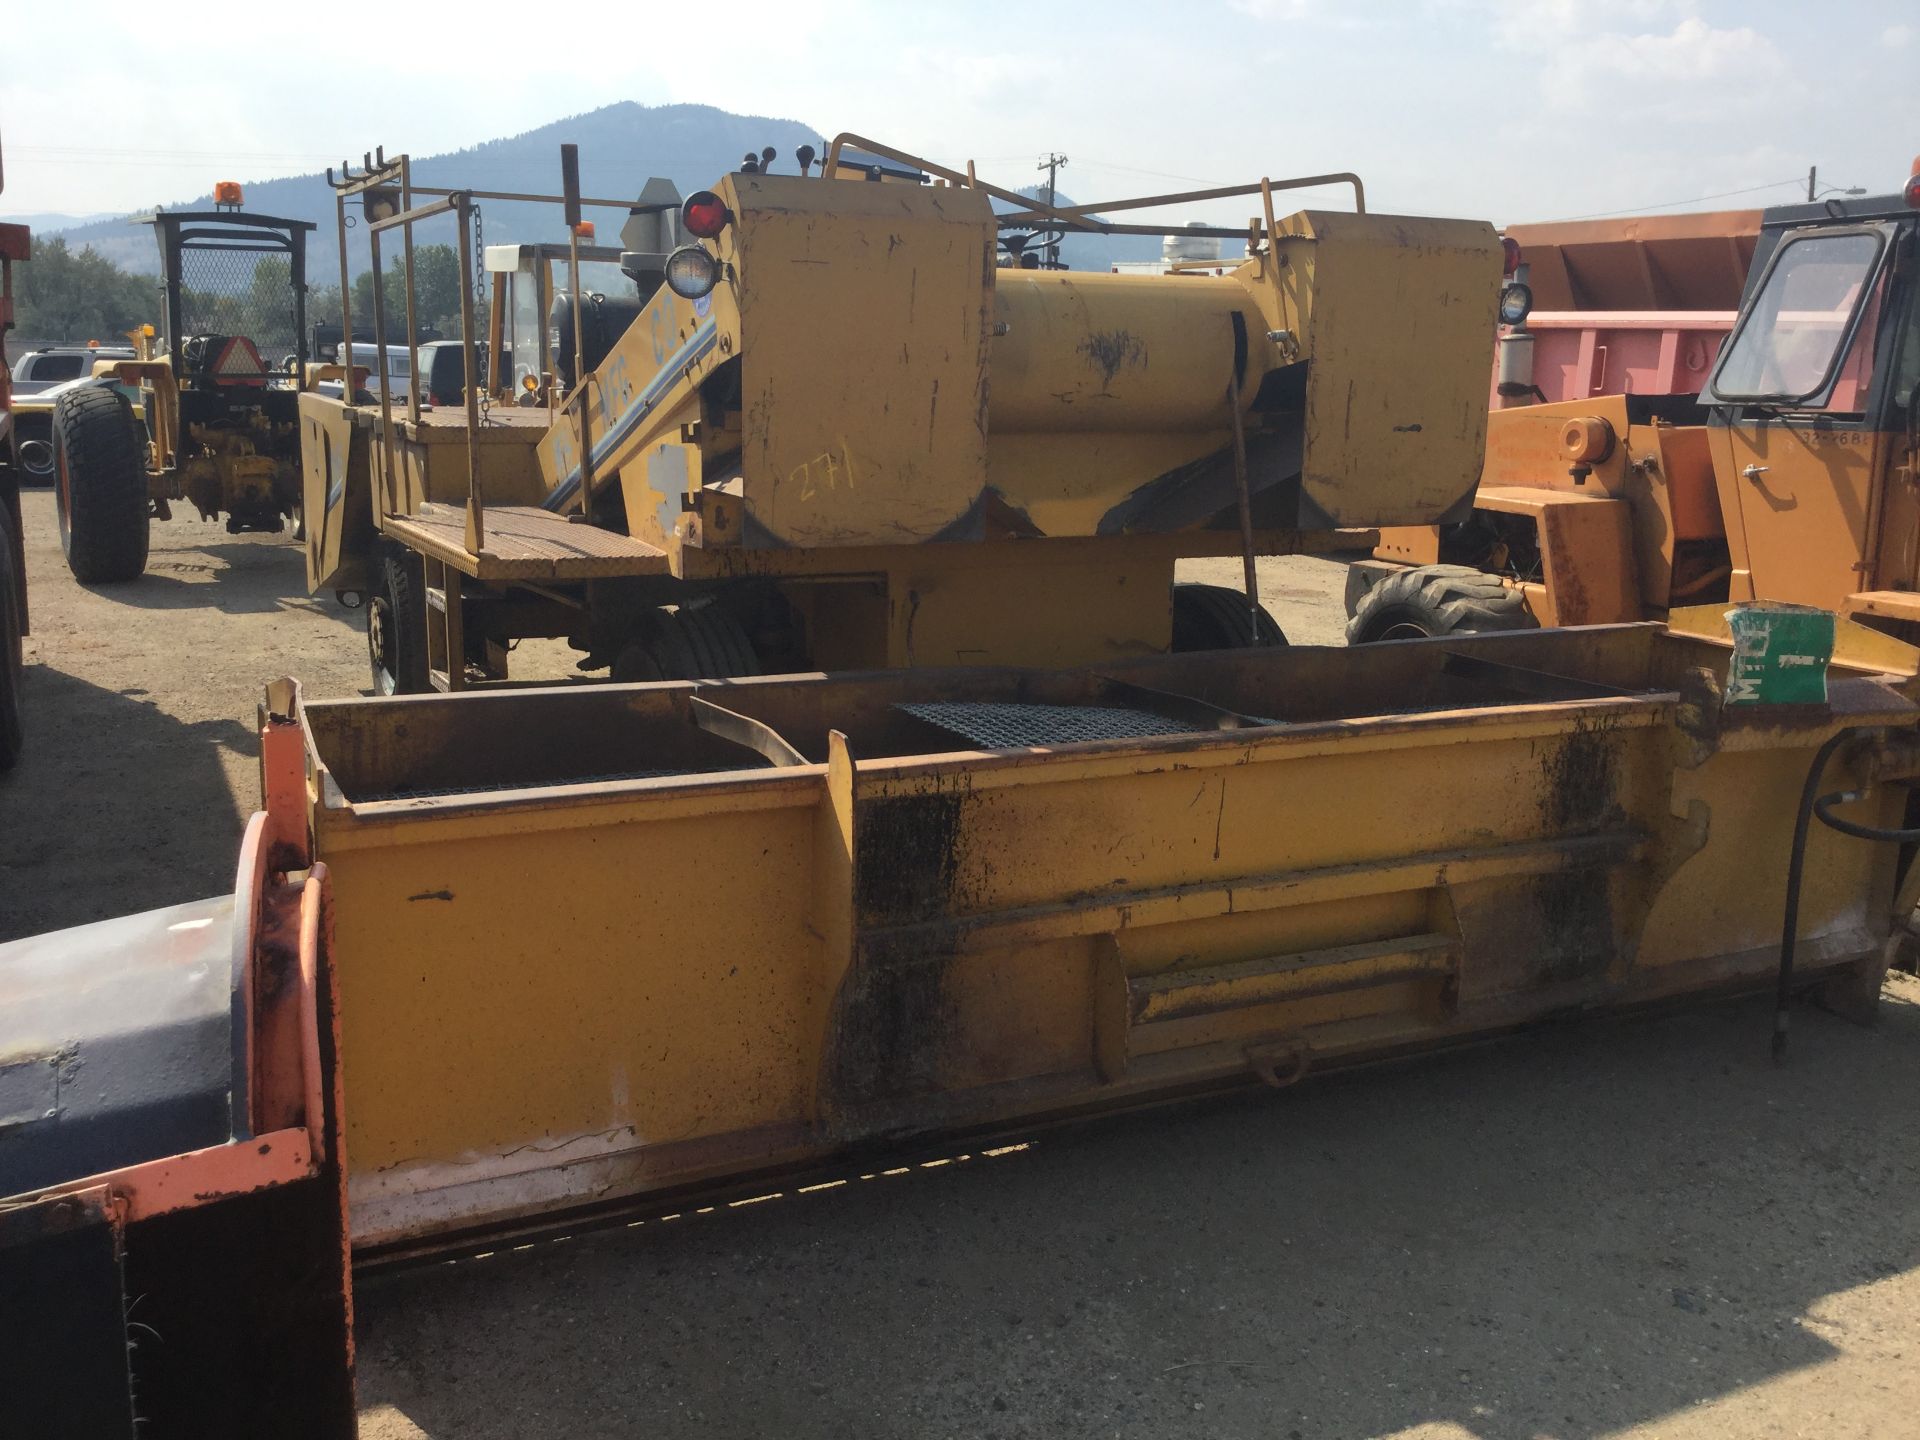 Year: 1989 Make: WH Mfg Co Model: SpreadKing Type: Chip Spreader Vin#: 8910 Mileage/Hours: 49 HRS